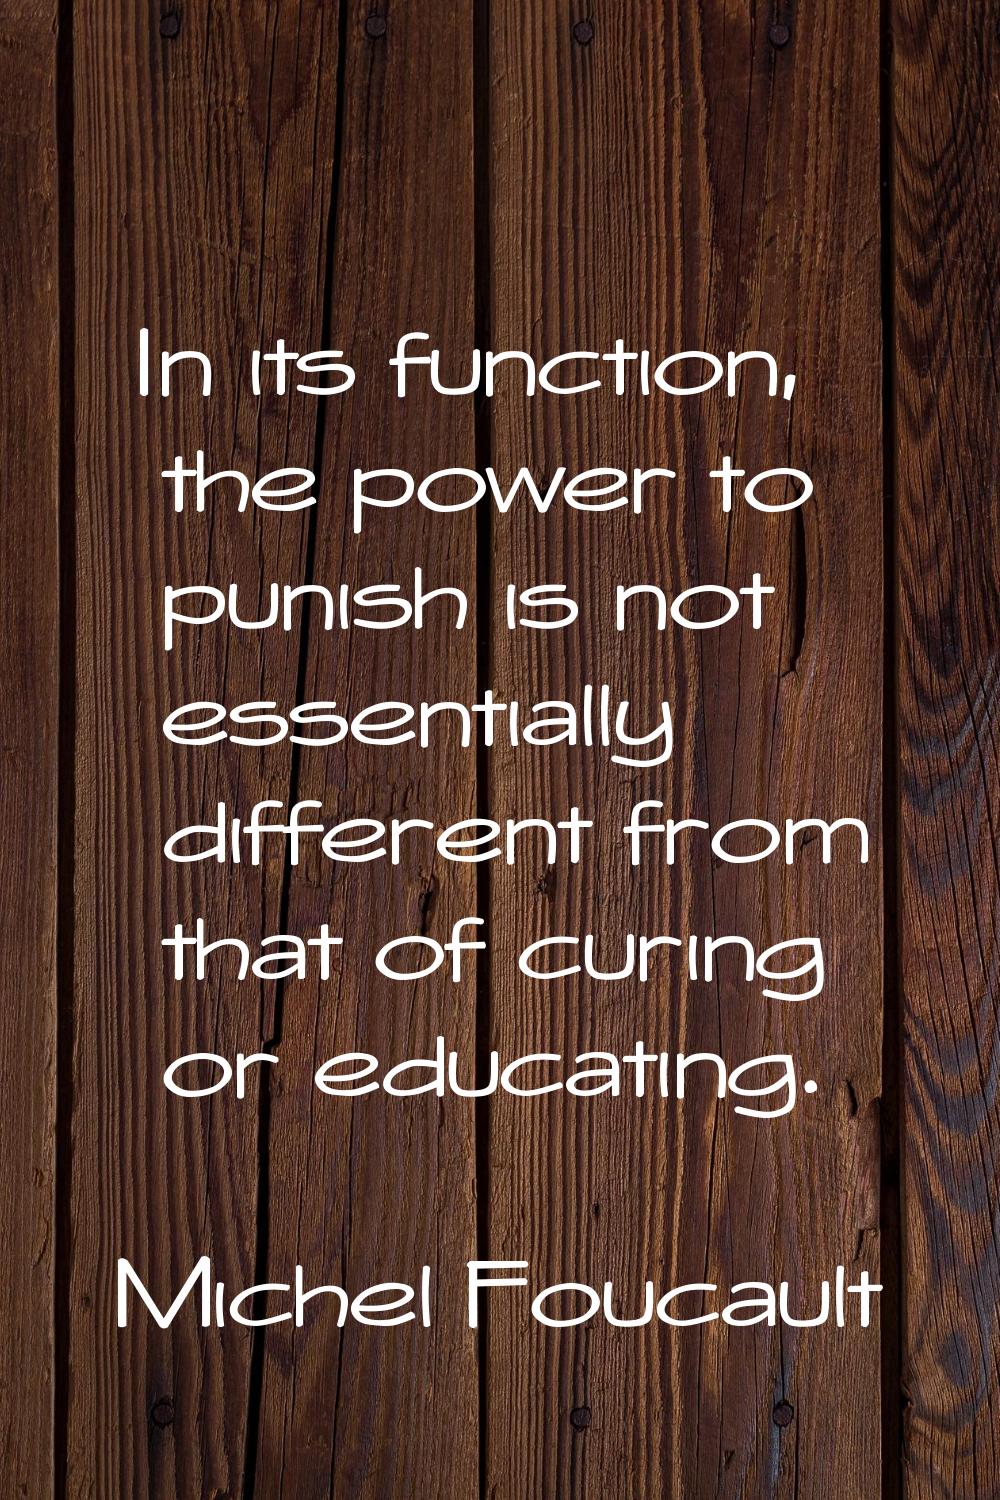 In its function, the power to punish is not essentially different from that of curing or educating.